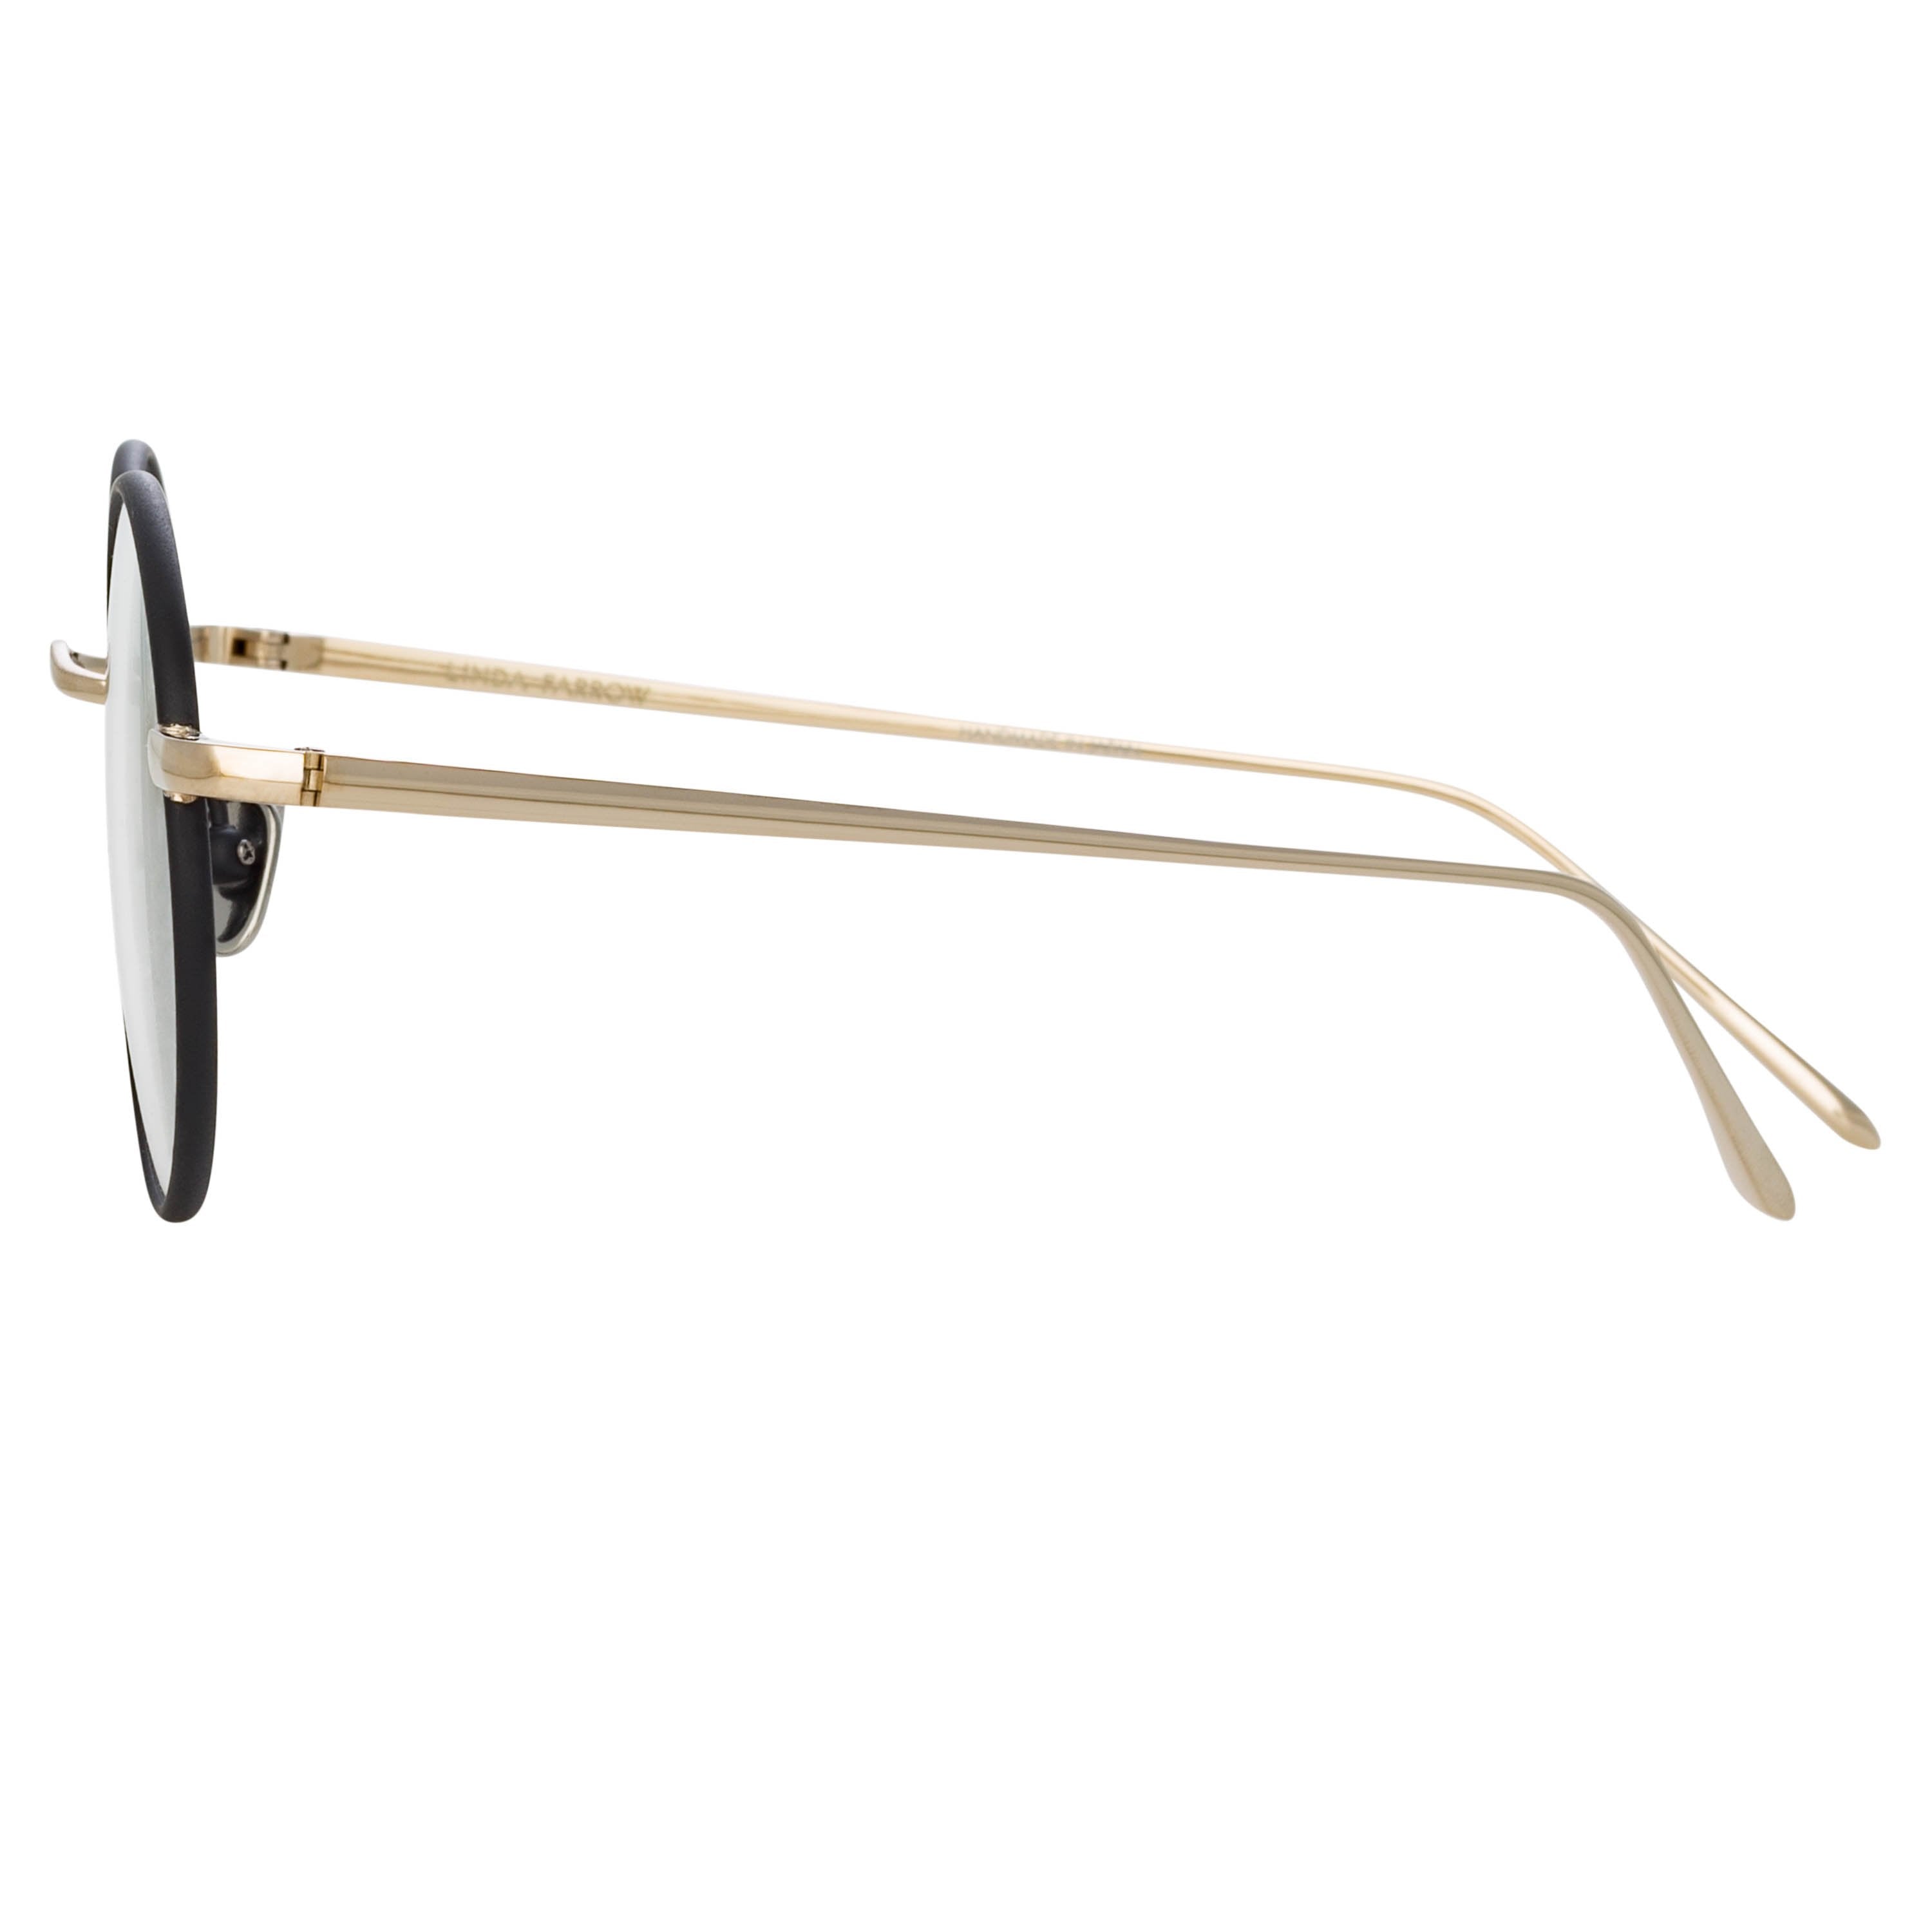 Color_LFL925C3OPT - Adams Oval Optical Frame in Black and Light Gold